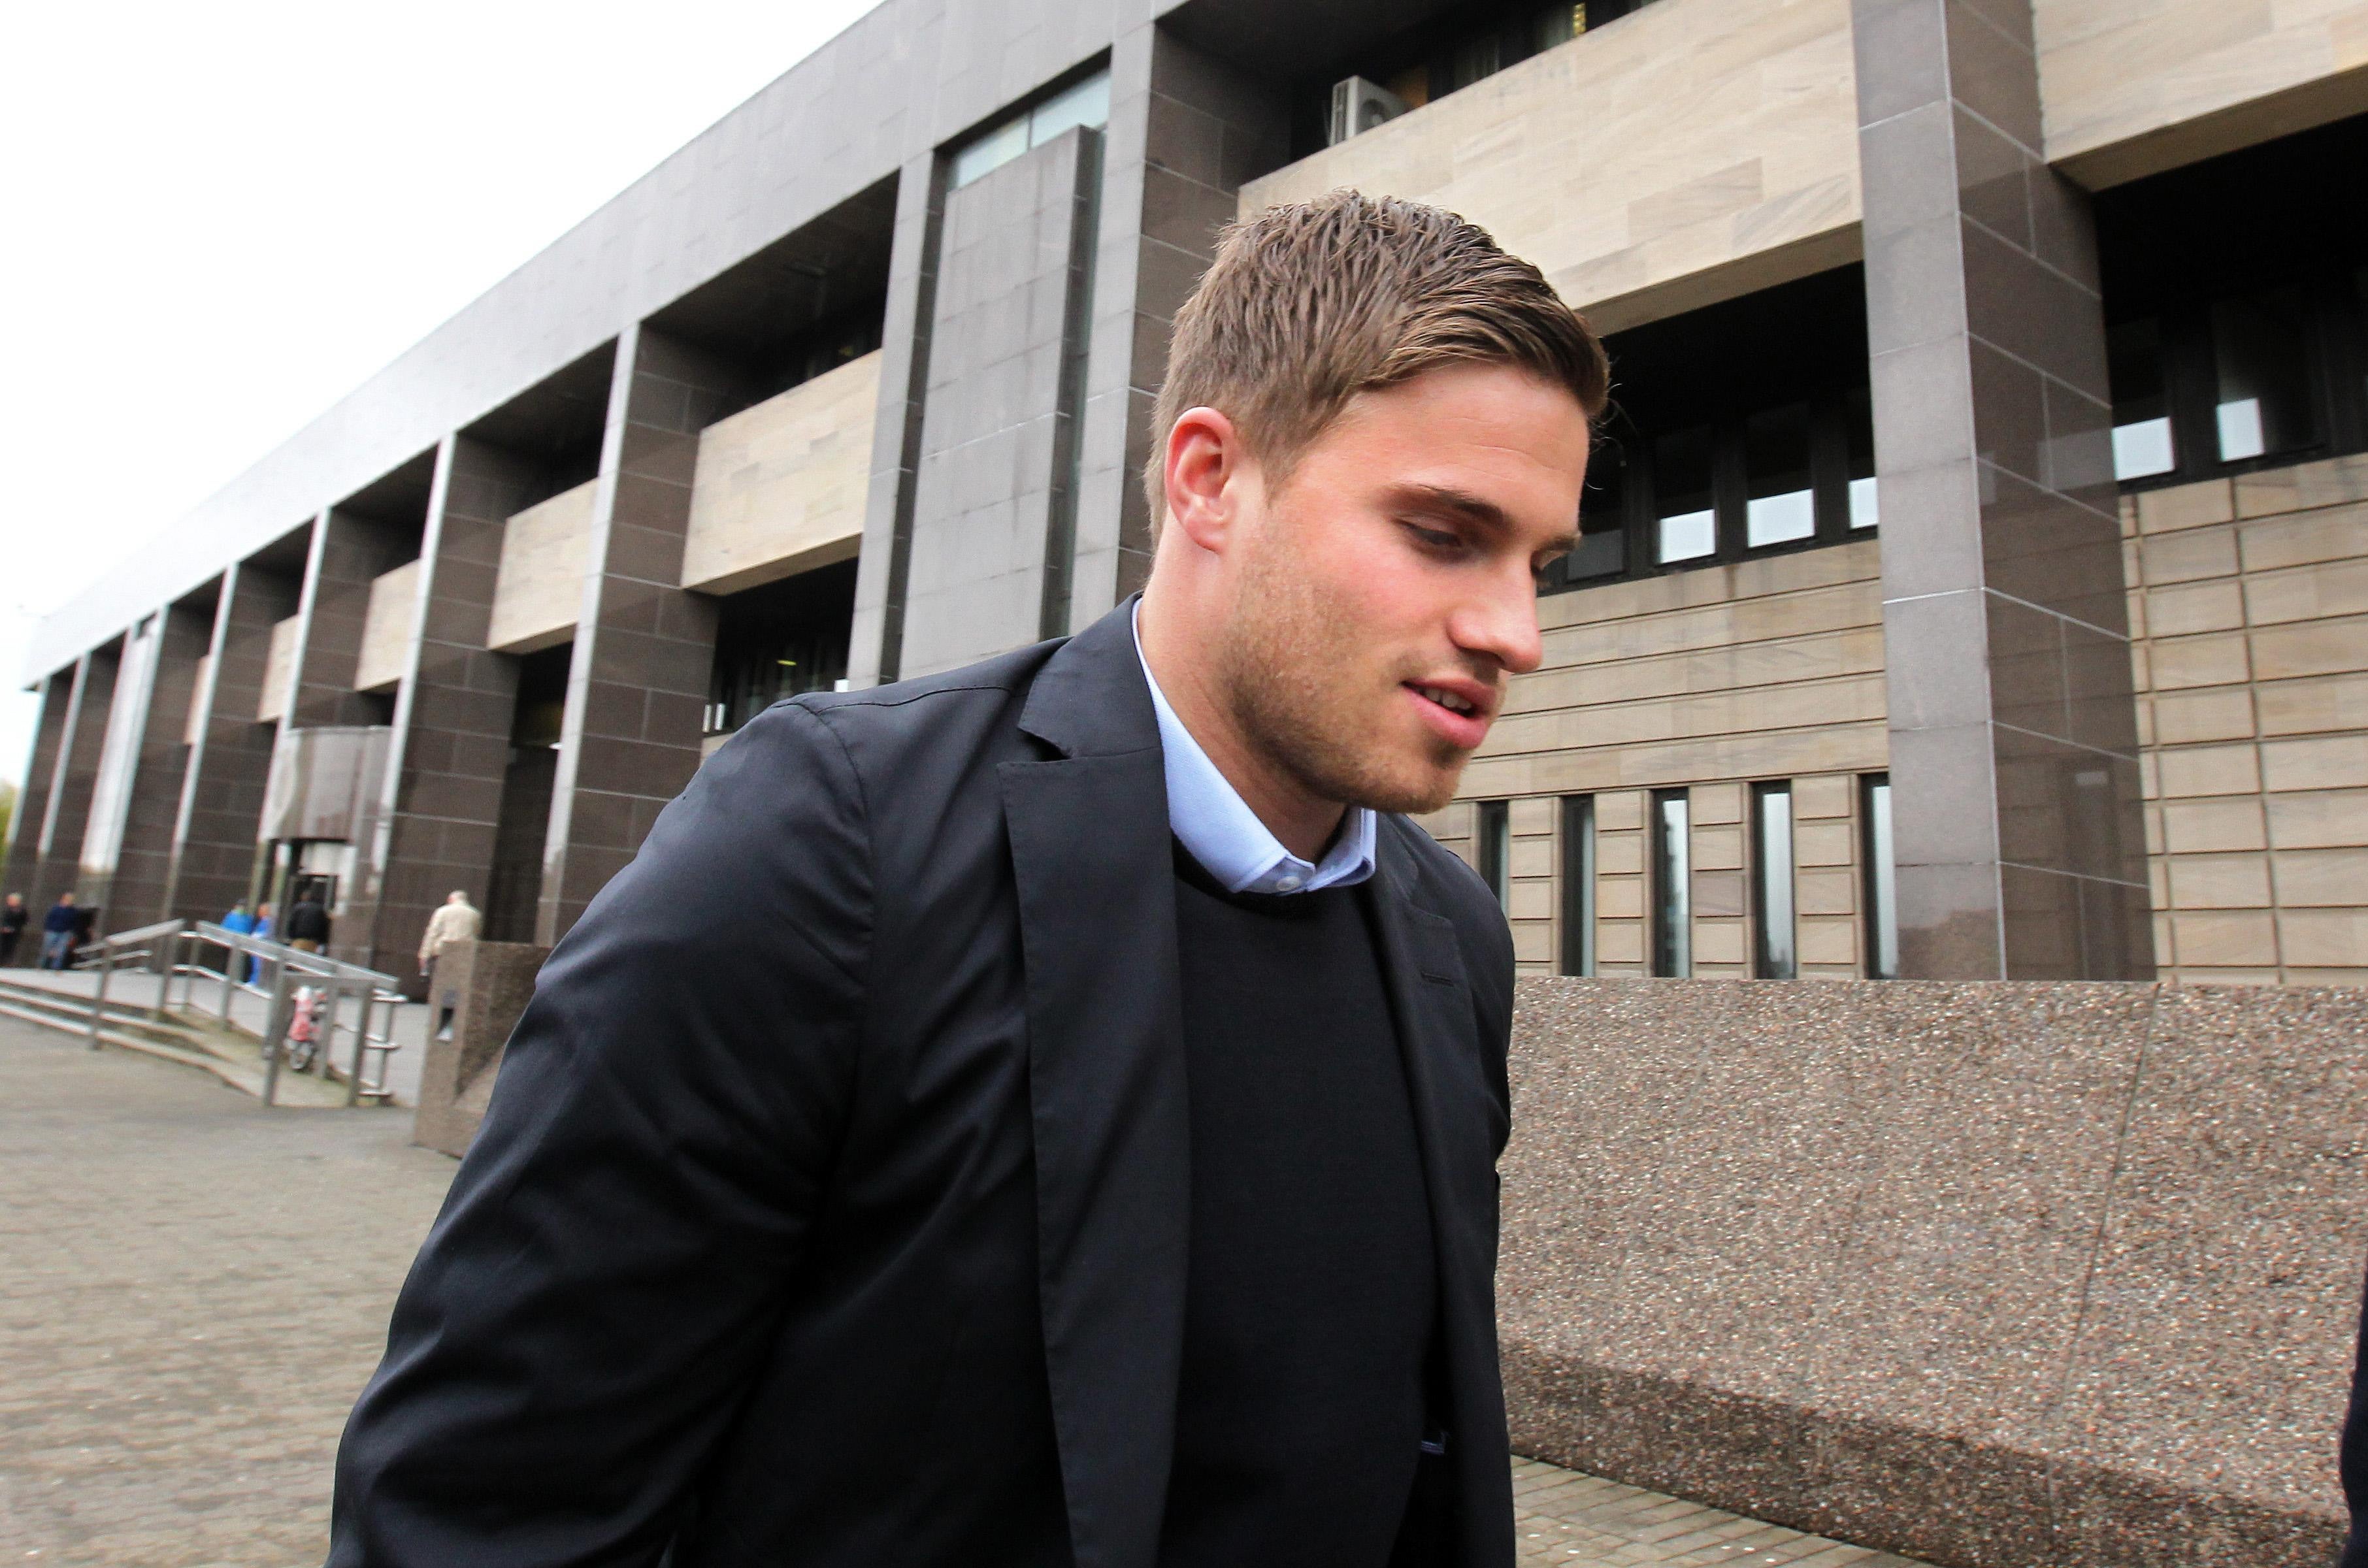 David Goodwillie’s signing sparked controversy (Andrew Milligan/PA)